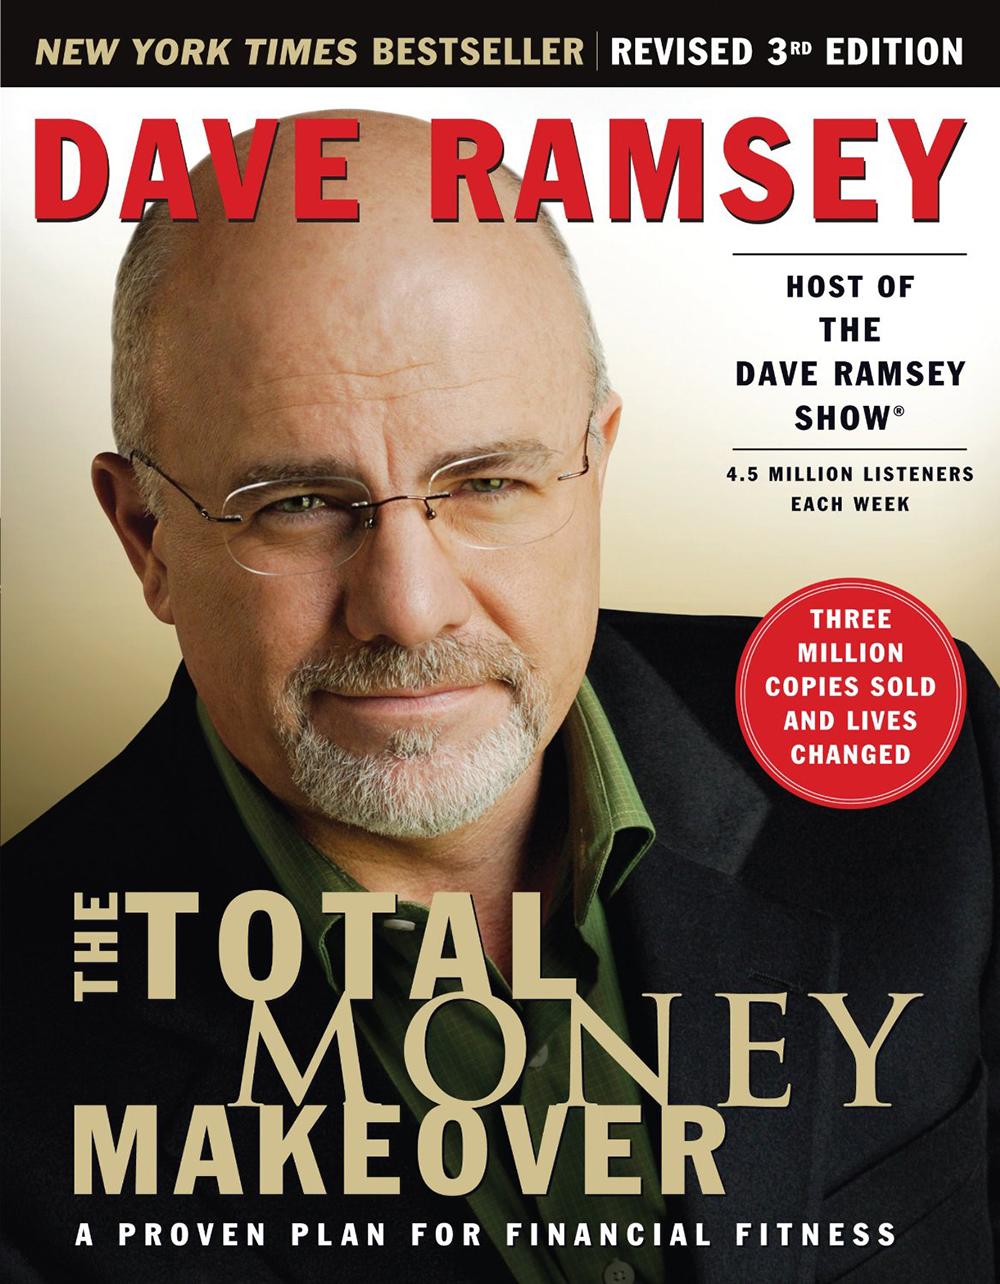 Best-selling author and radio personality Dave Ramsey announced his company, Ramsey Solutions, will build a new corporate campus in Franklin, Tenn. The Nashville area deal will create 400 jobs. 